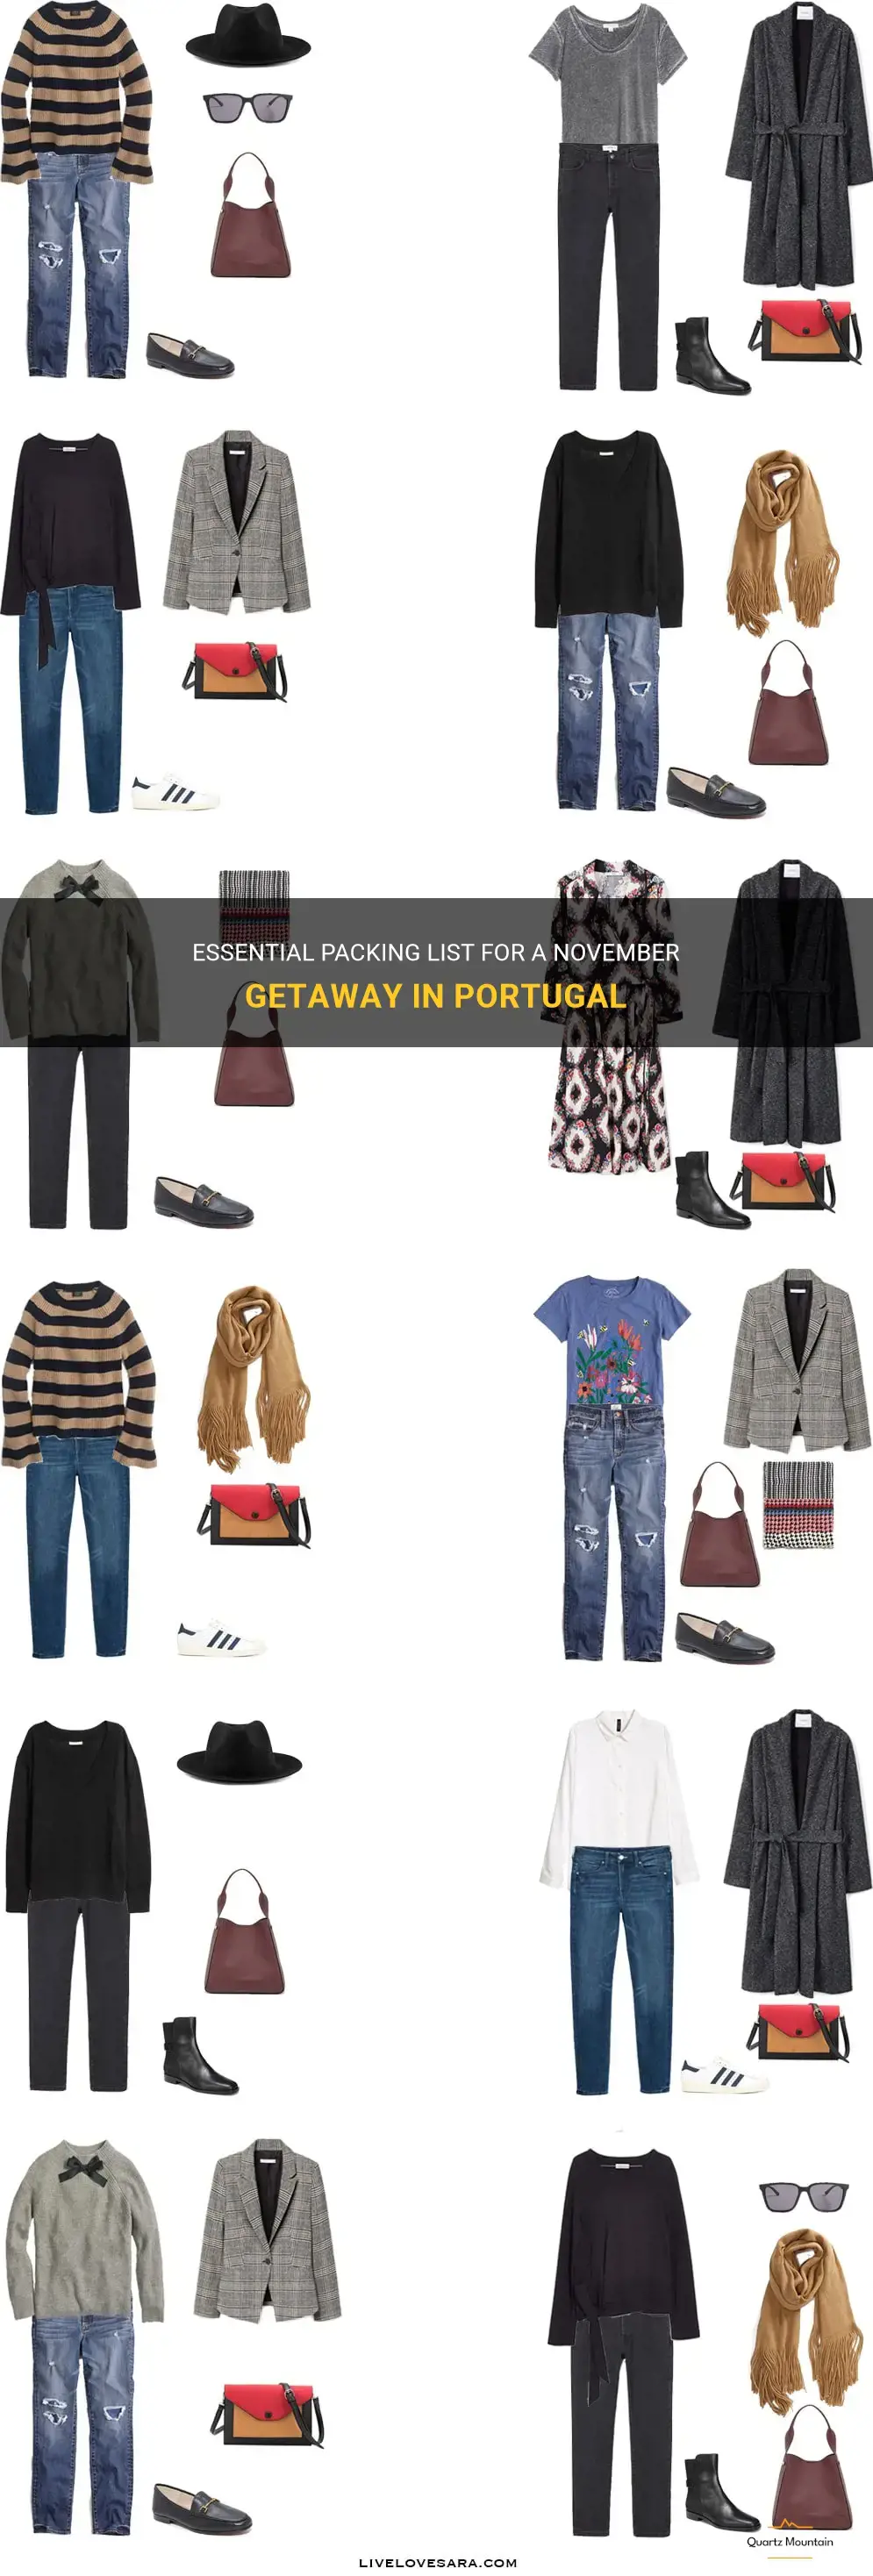 what to pack for november in portugal